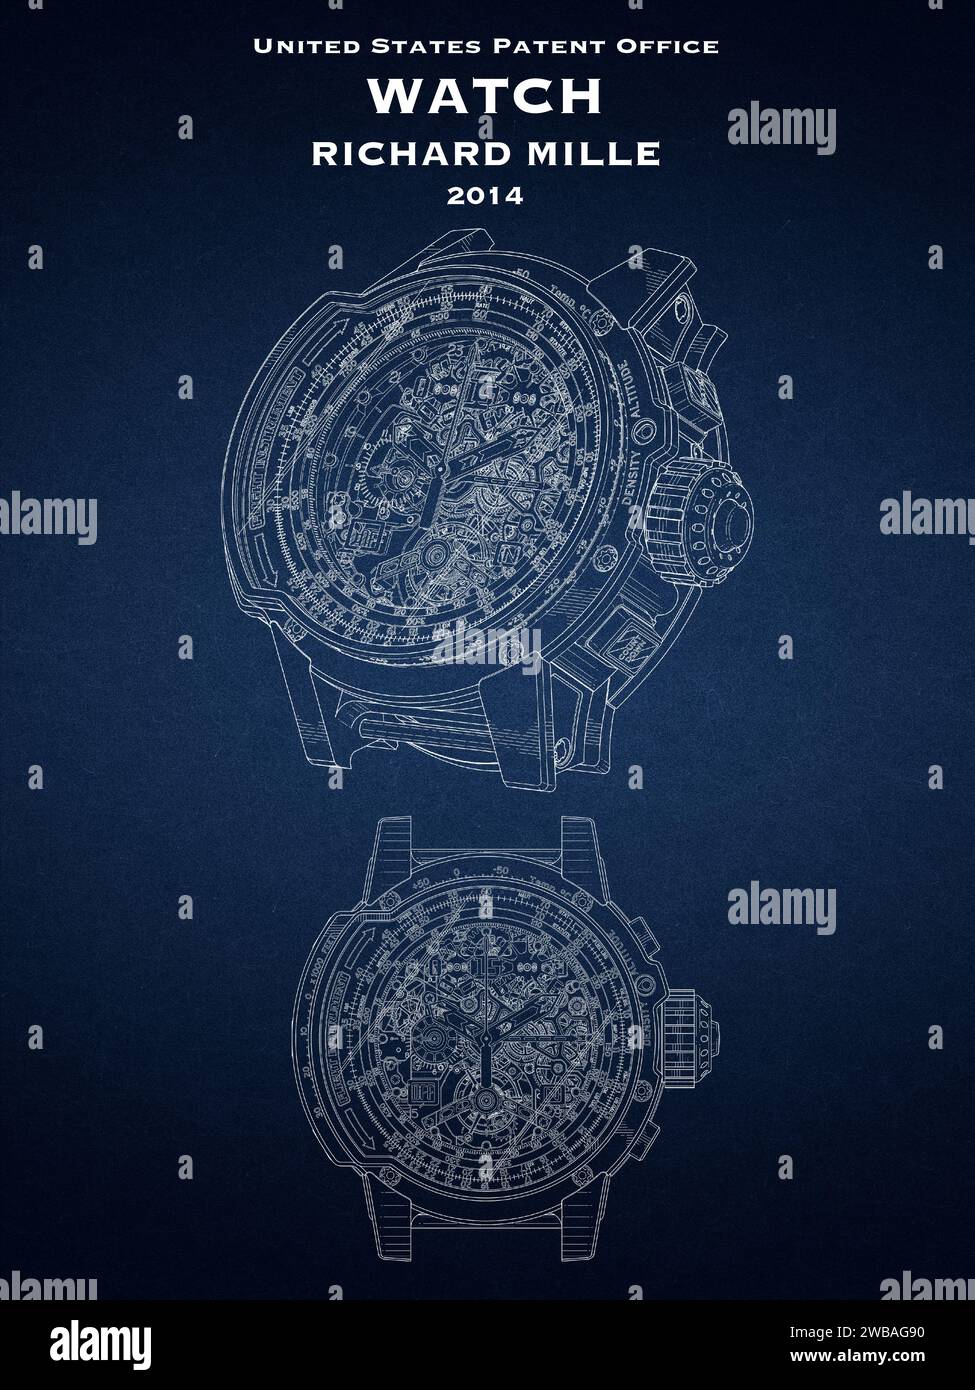 US patent office design for a luxury watch by Richard Mille on a blue background Stock Photo